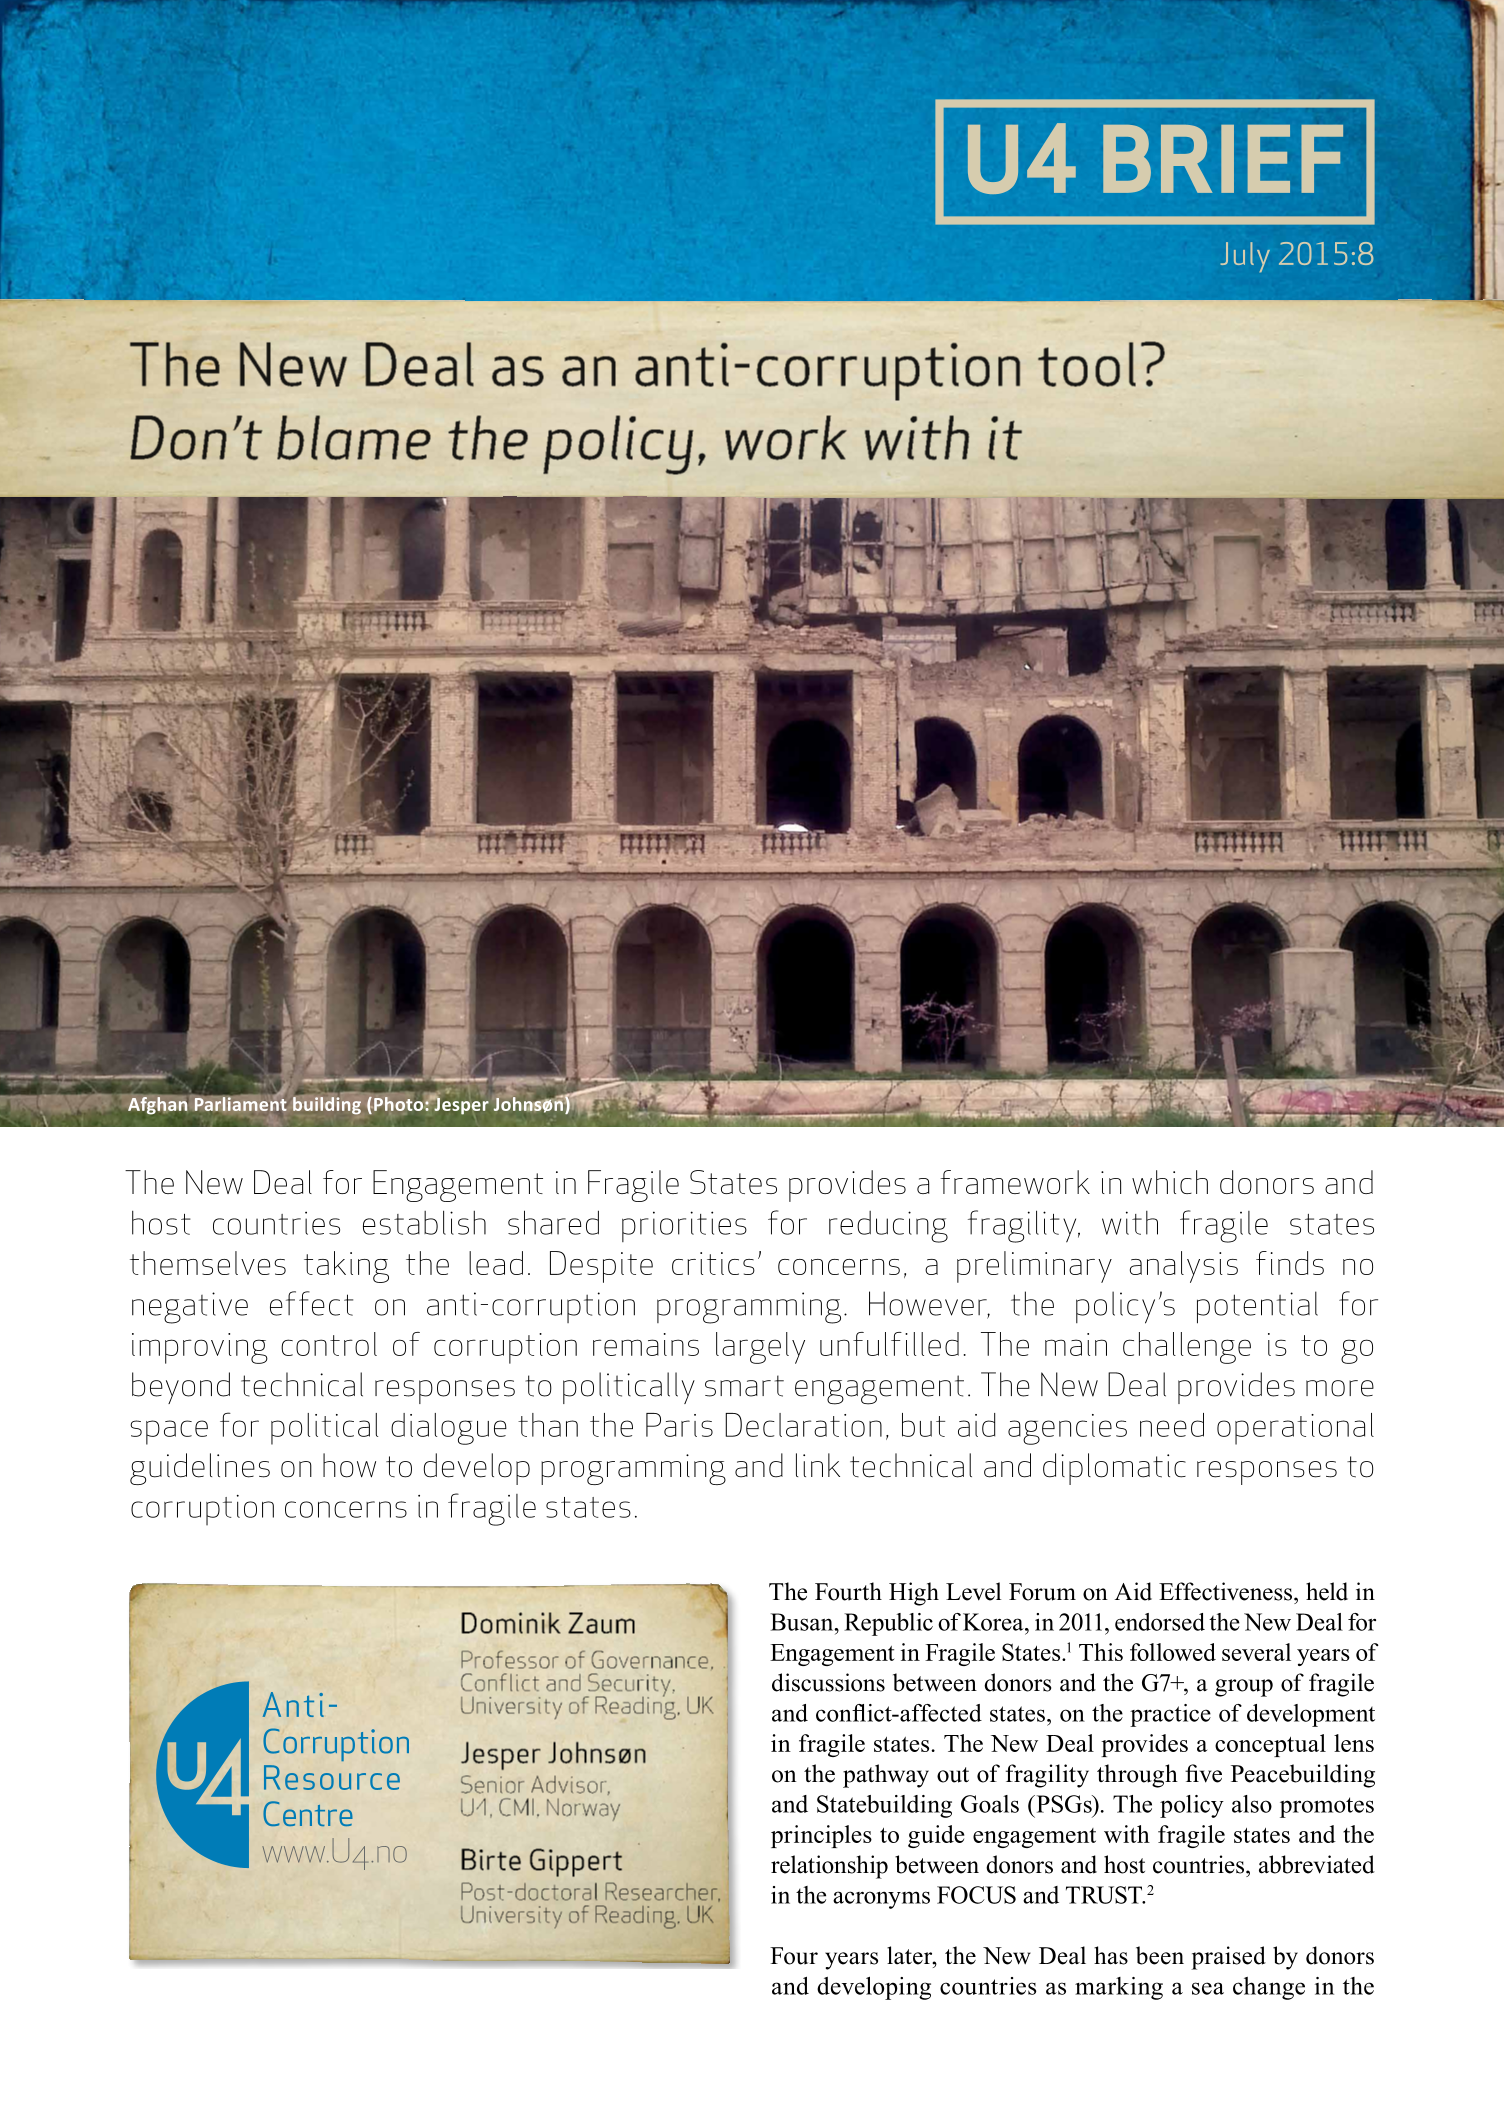 The New Deal as an anti-corruption tool? Don’t blame the policy, work with it